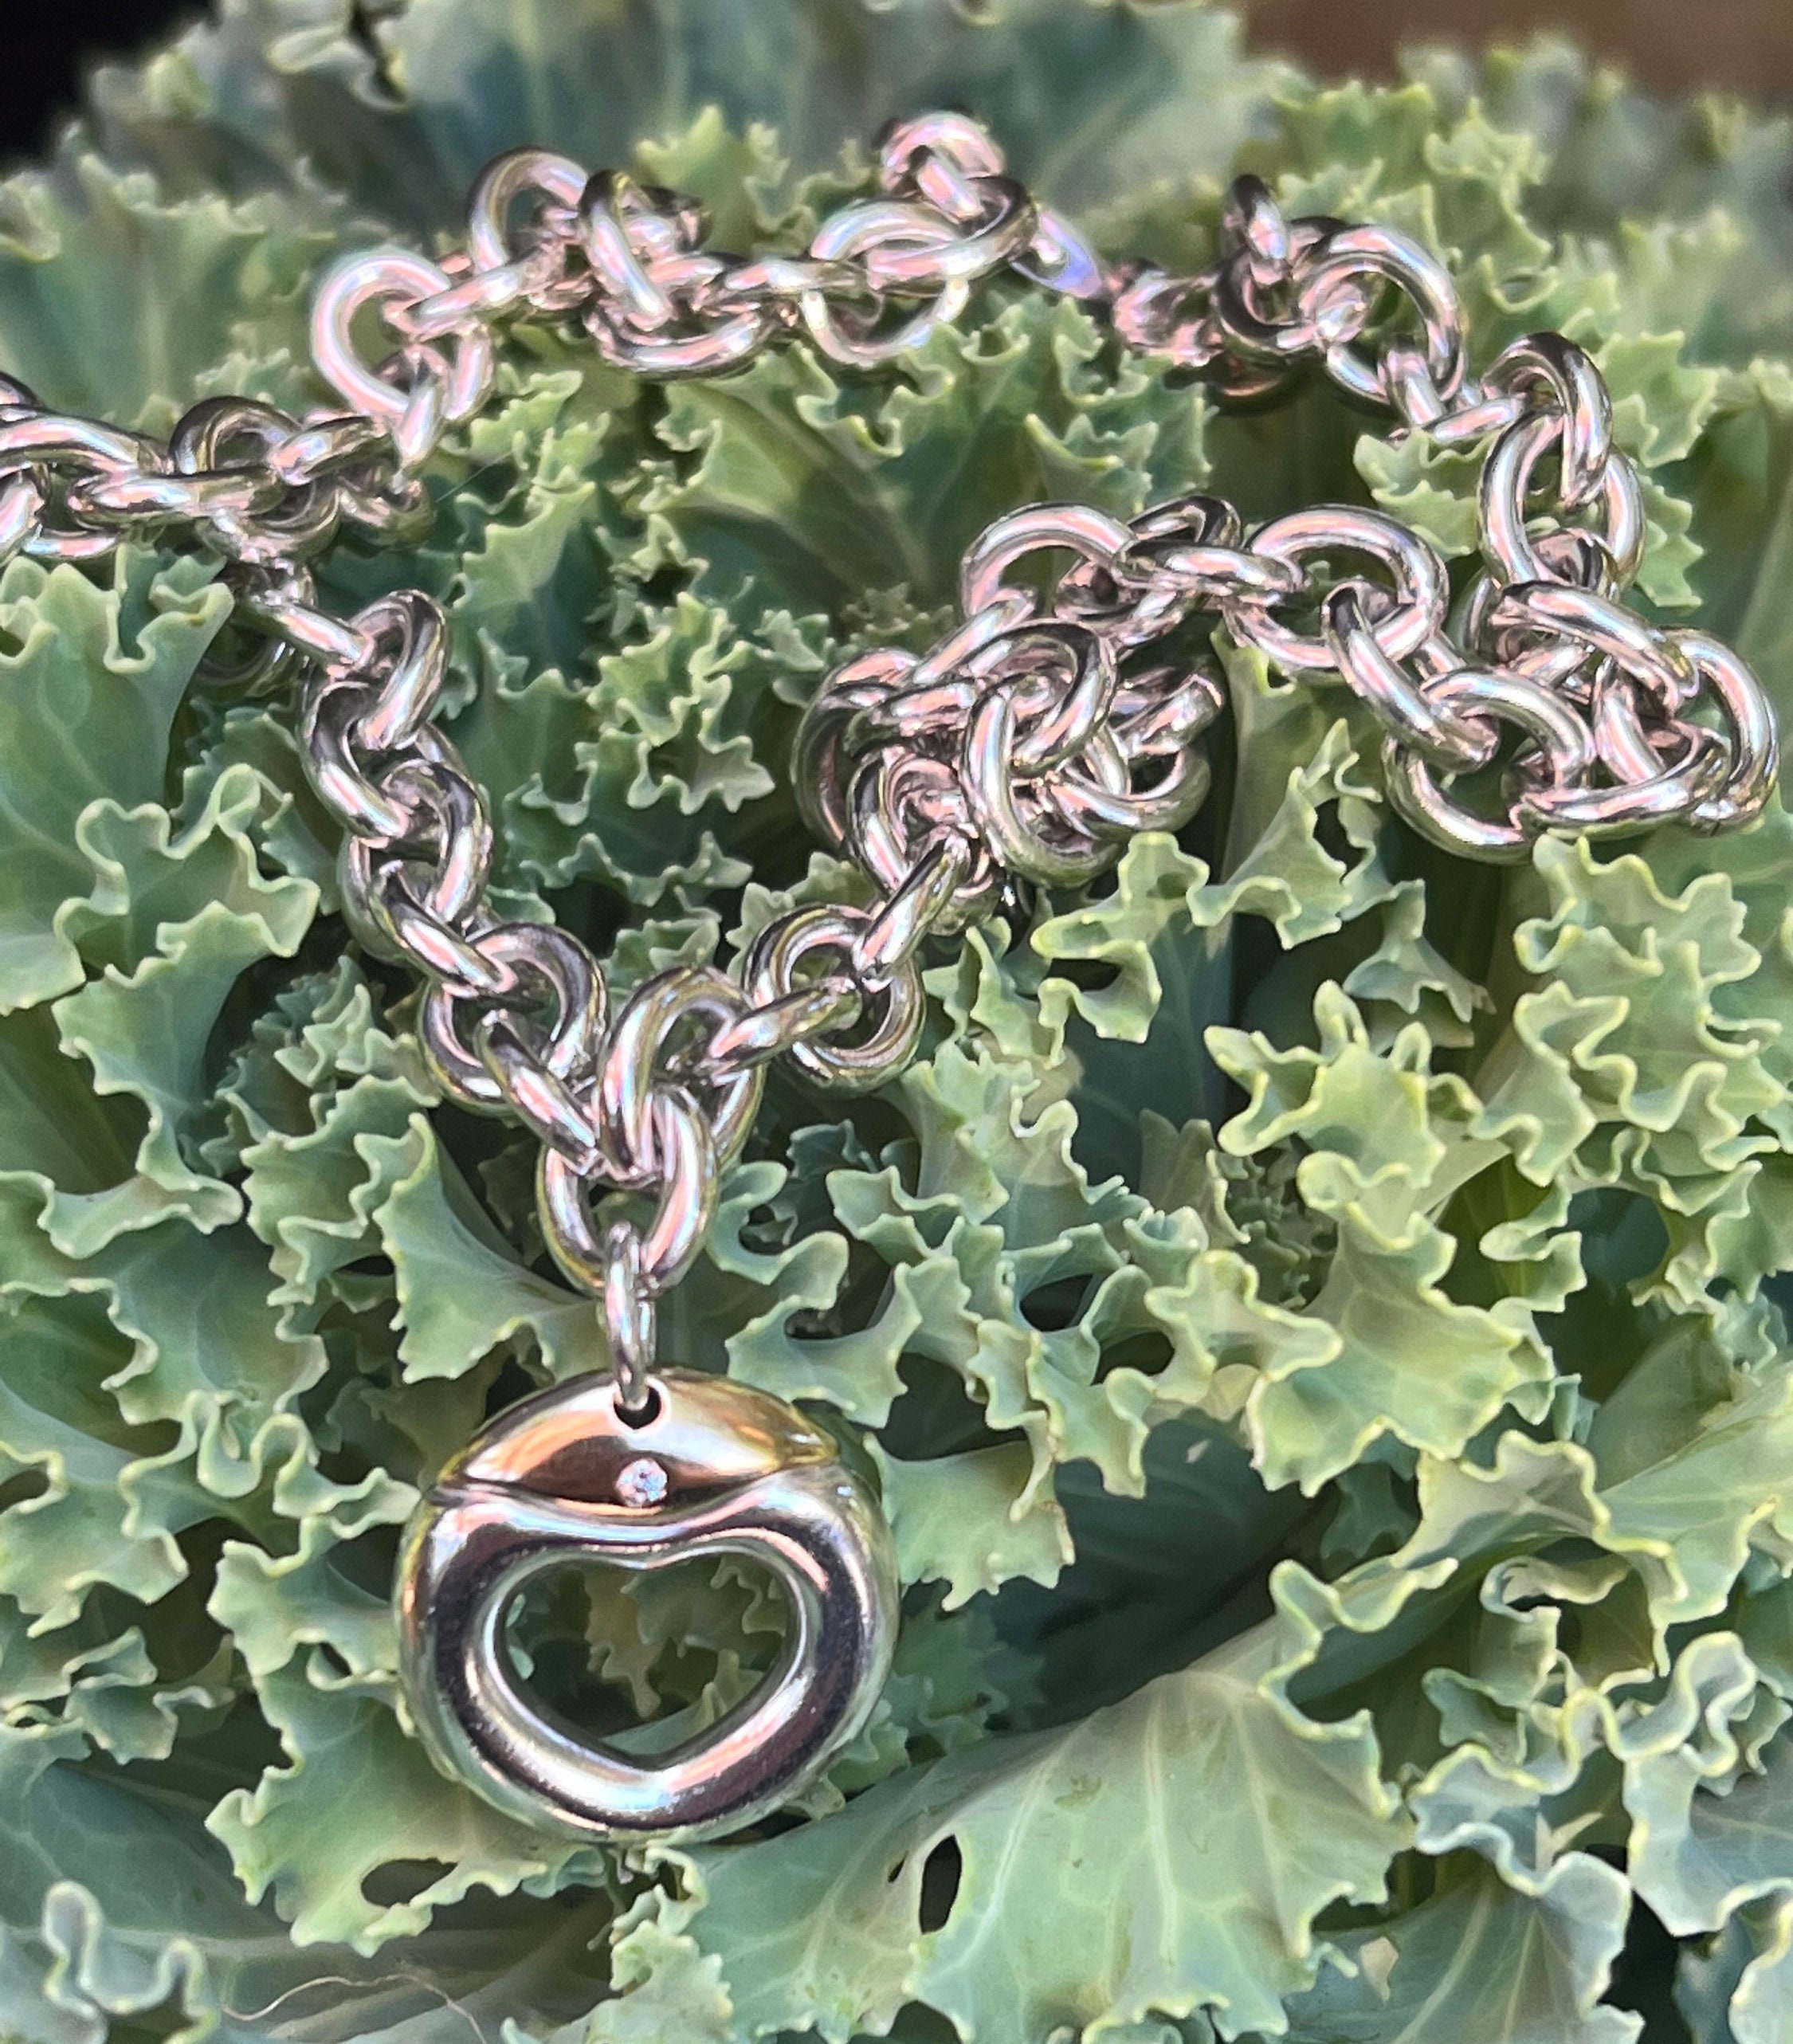 Movado  Sphere Lock Collection sterling silver necklace with a twisting lock  pendant